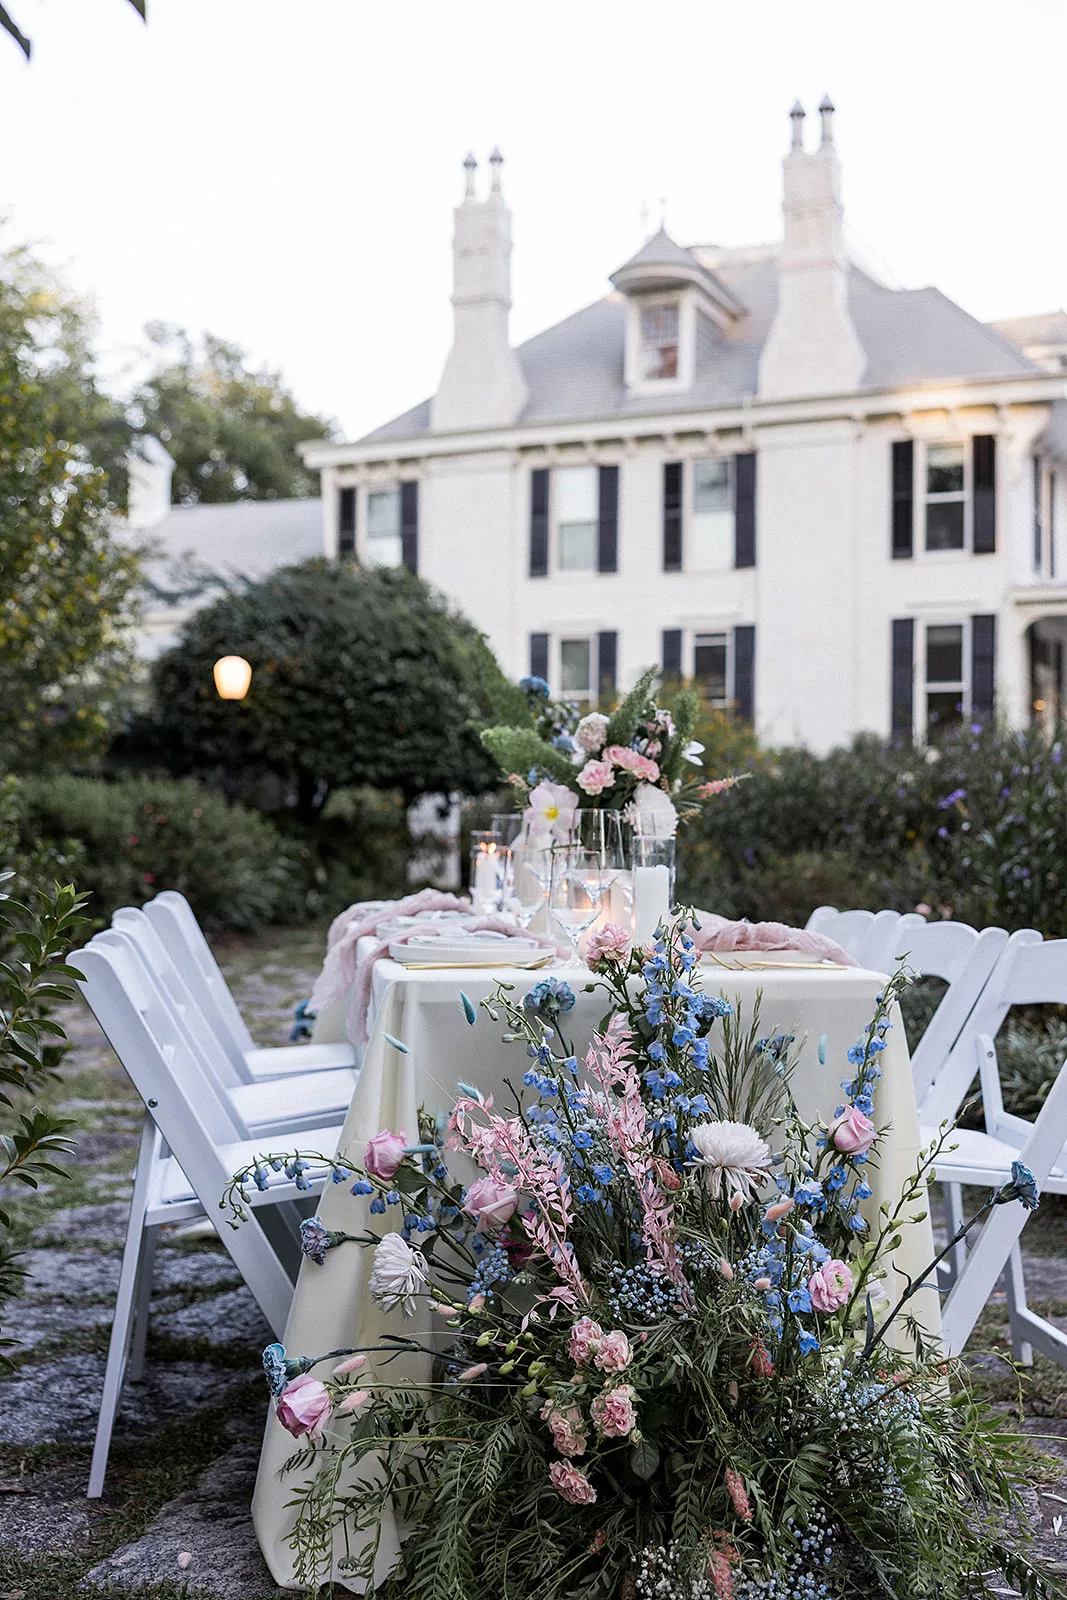 Details of an outdoor Wildflower 301 wedding reception table with blue and pink florals and white chairs in a garden